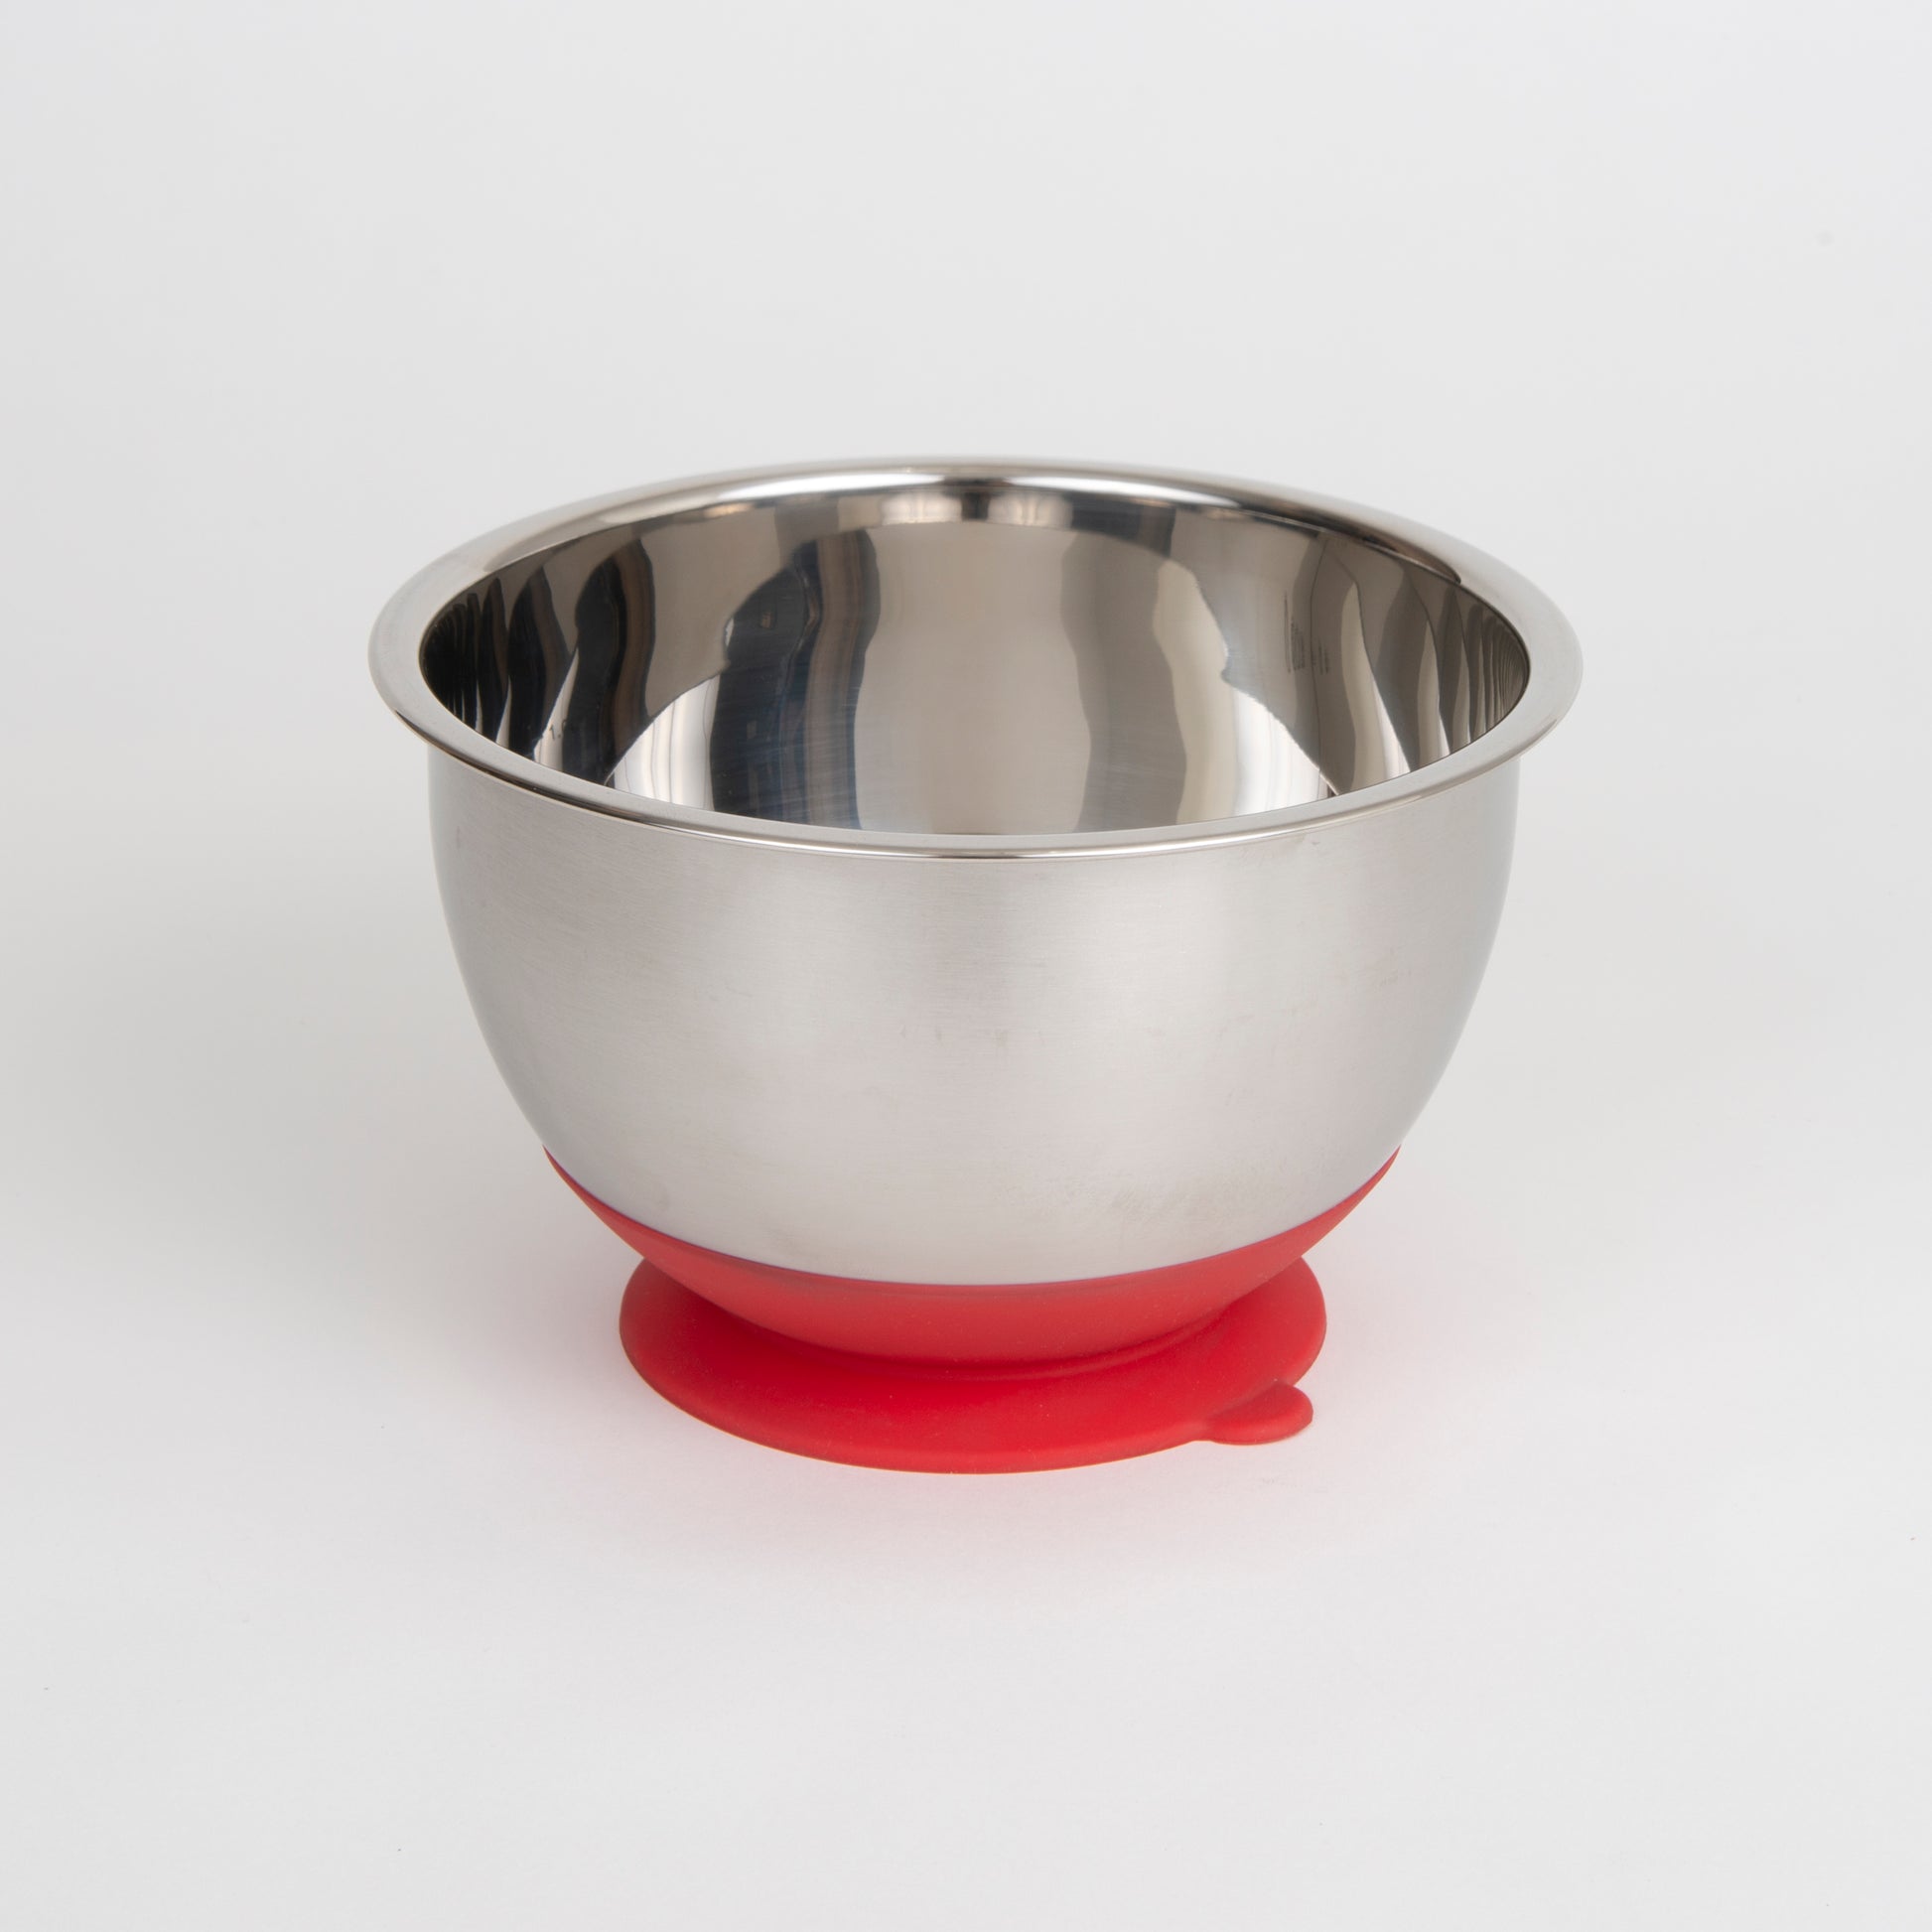 Choice .75 Qt. Stainless Steel Mixing Bowl with Silicone Bottom